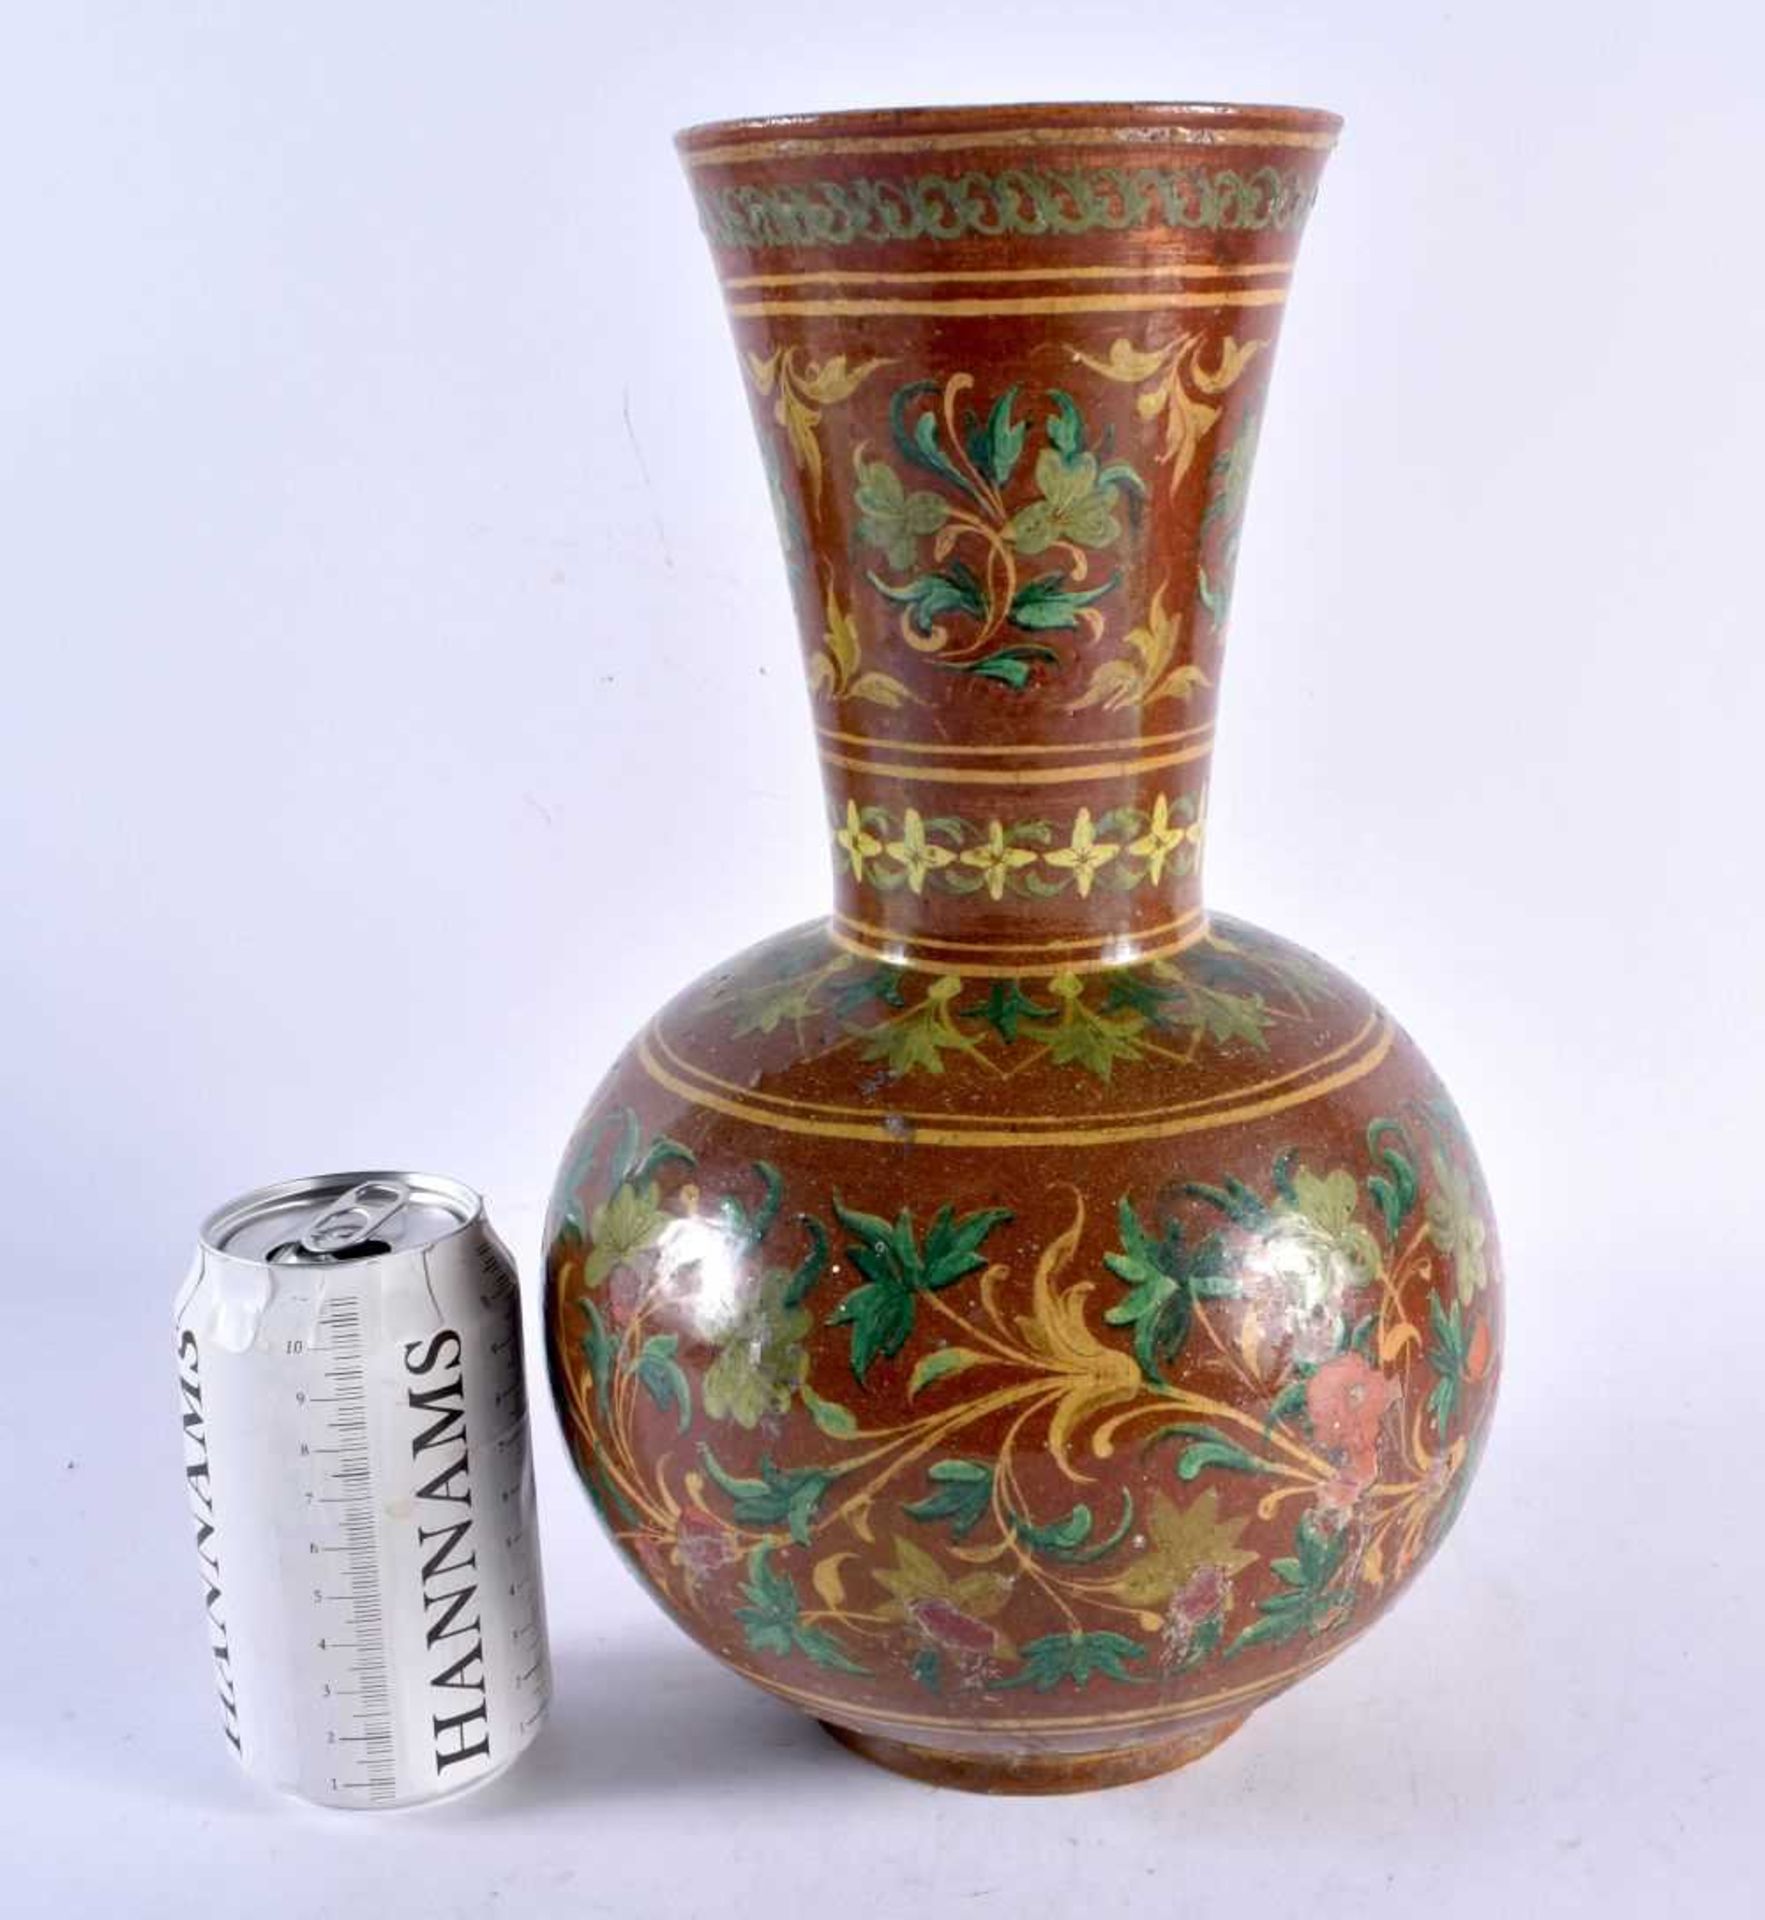 A FINE 19TH CENTURY MIDDLE EASTERN ISLAMIC INDIAN POTTERY VASE painted with stylised flowers in